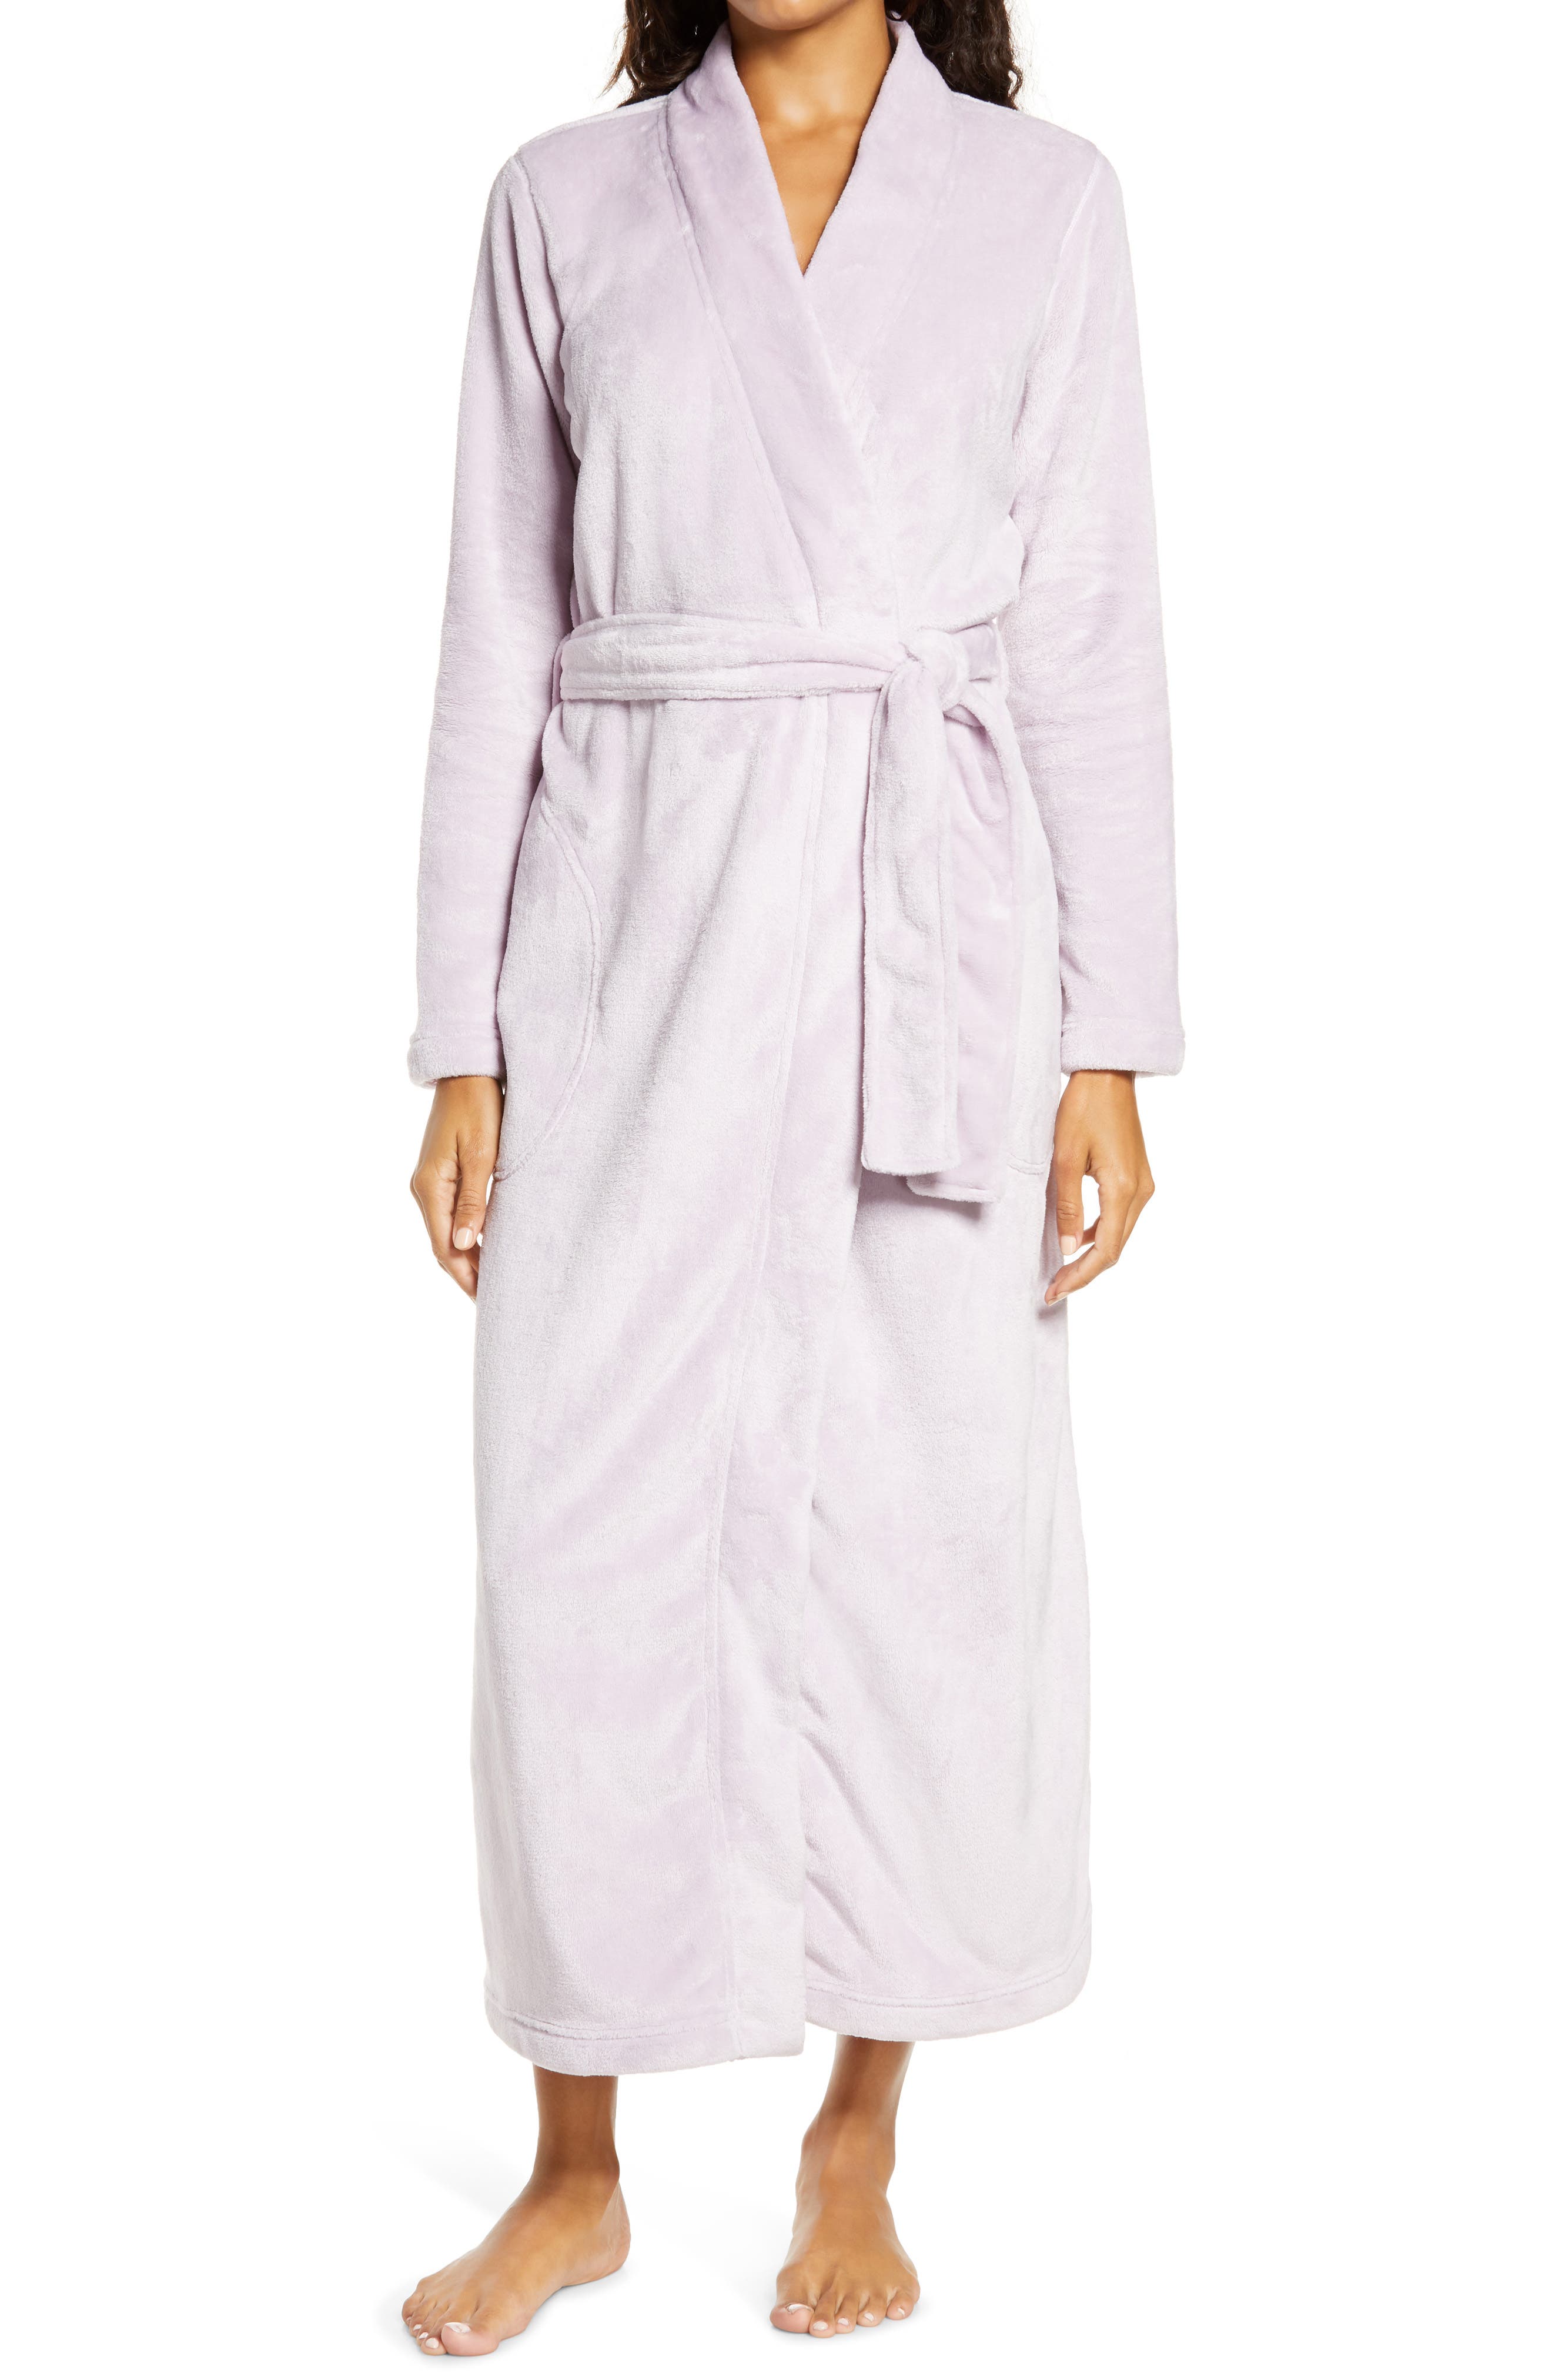 Ugg ® Marlow Double-face Fleece Robe In Lilac Frost